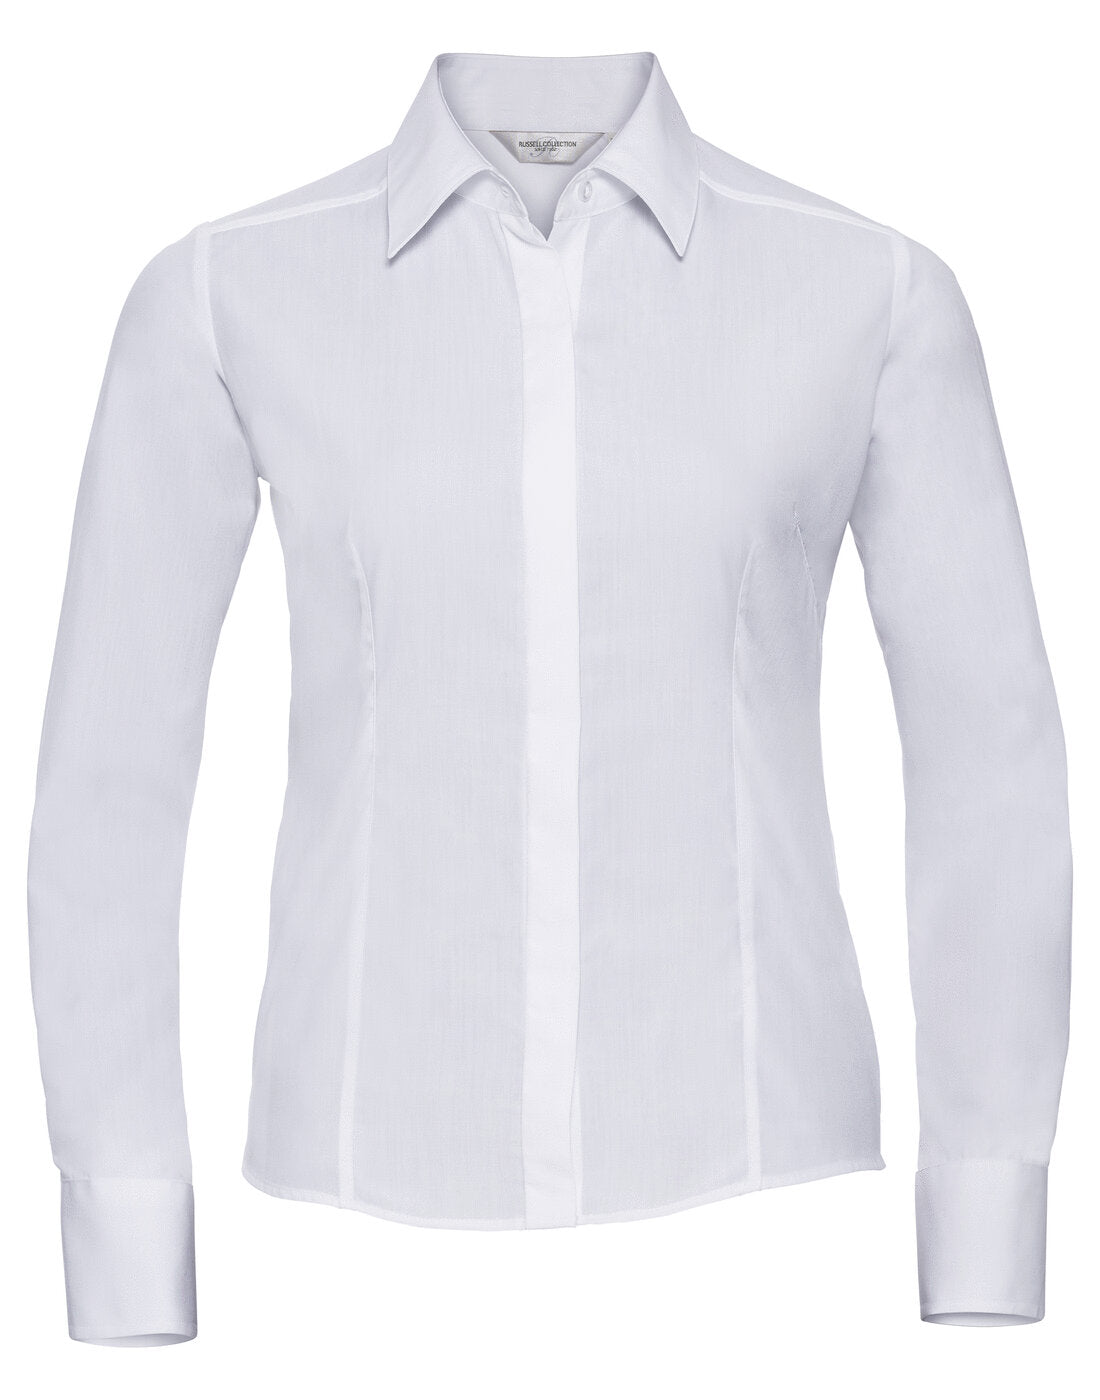 Russell Ladies Long Sleeve Fitted Polycotton Poplin Shirt White